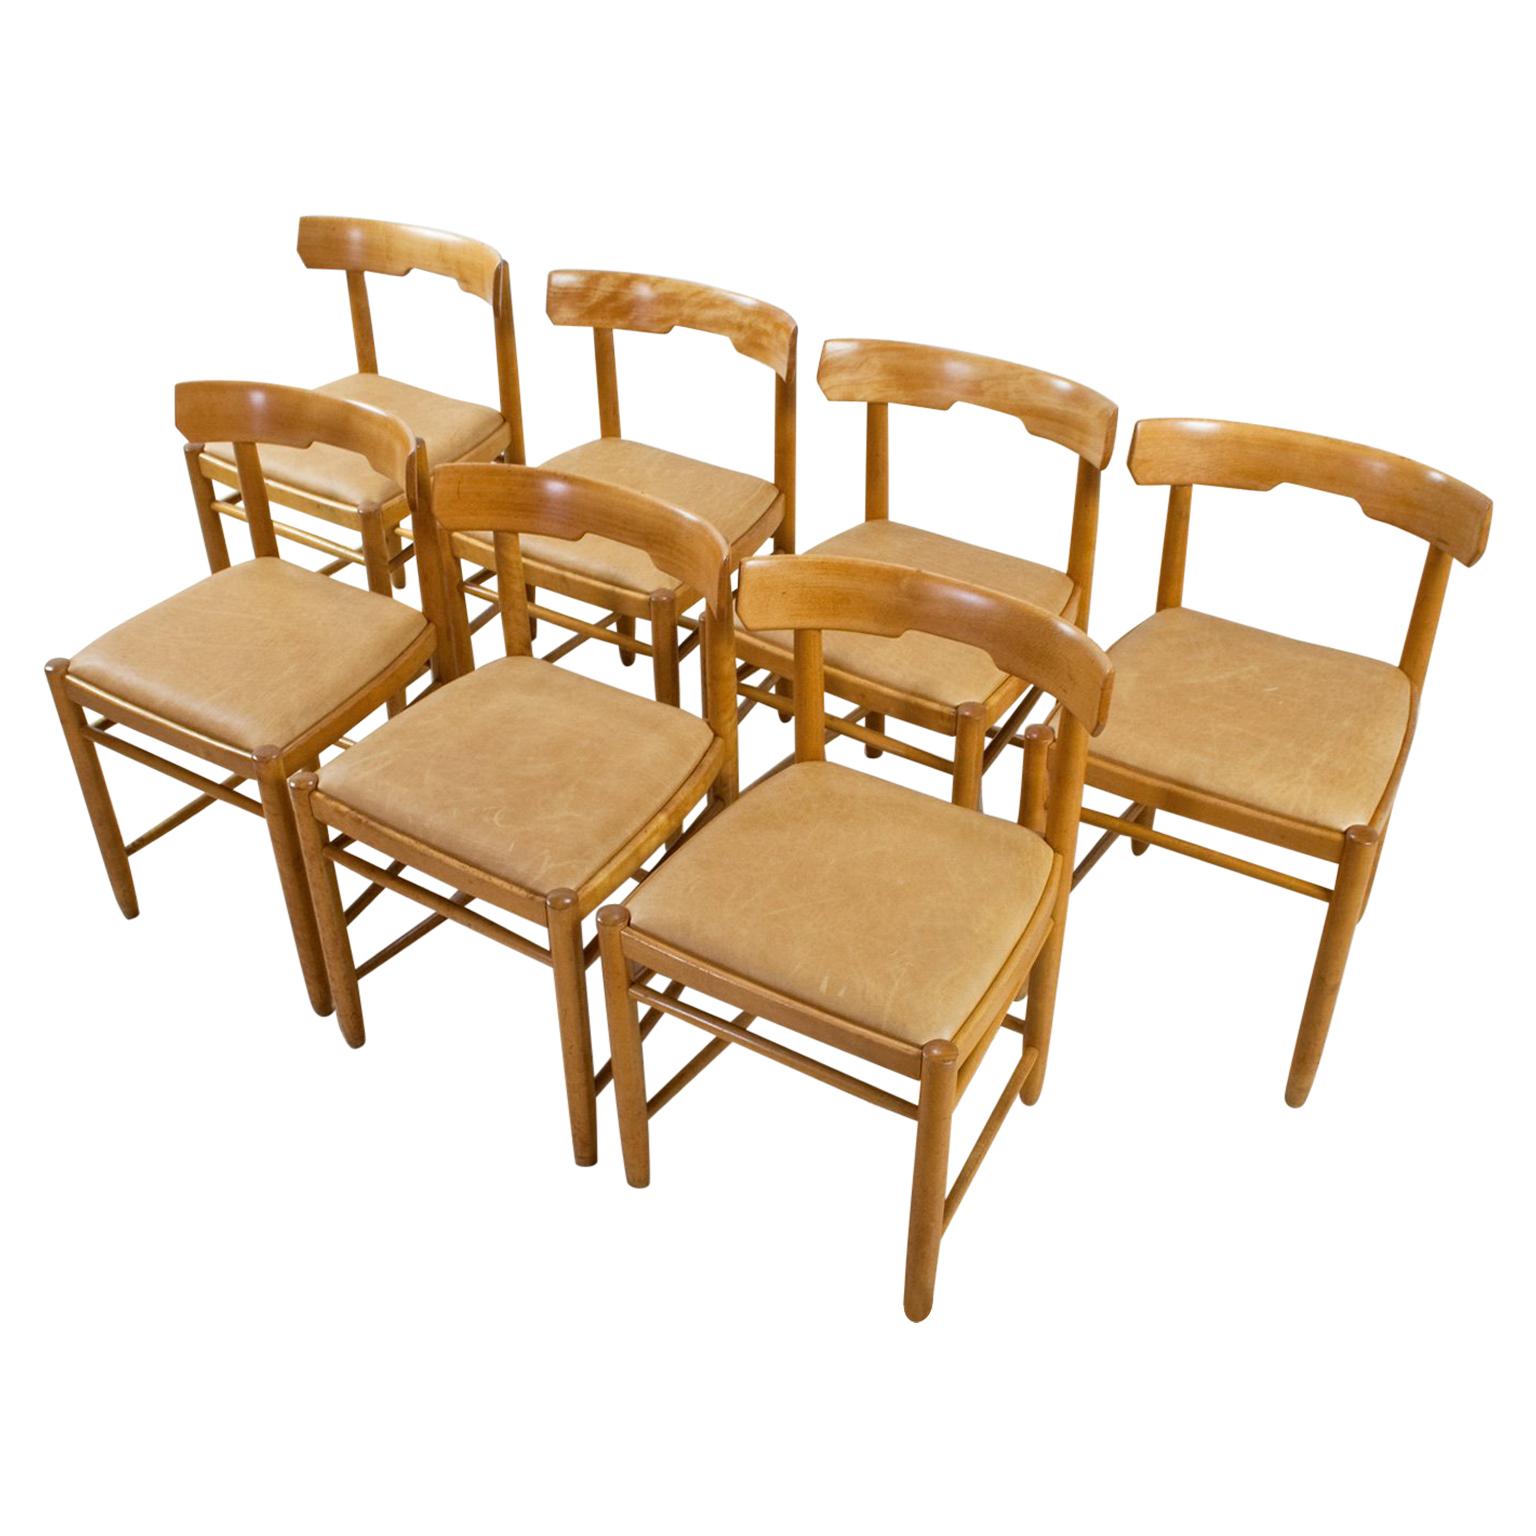 Scandinavian Modern Dining Room Chairs in Beech and Tan Leather, 1960s Set of 7  For Sale